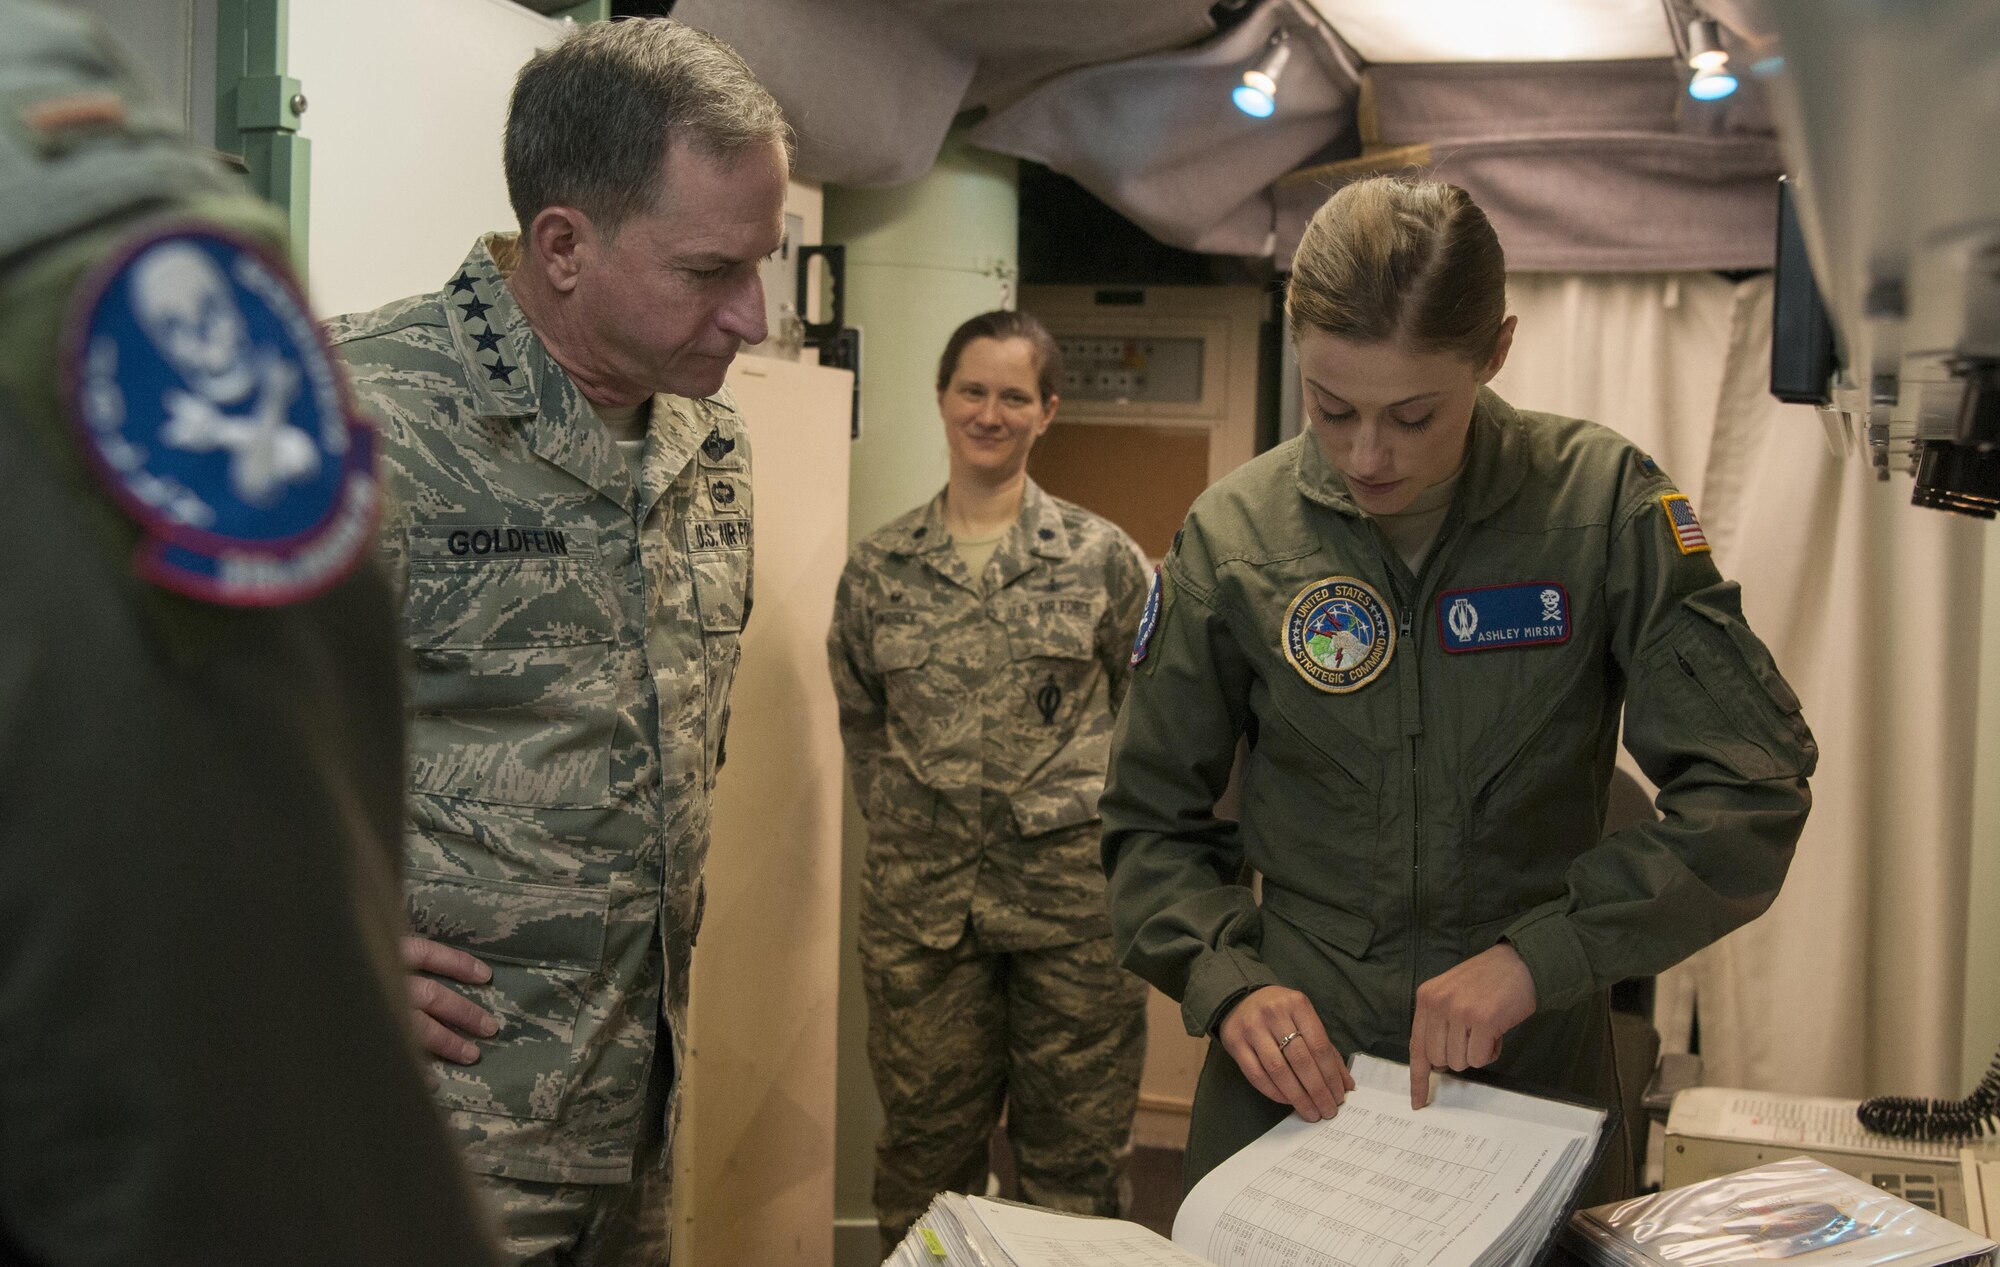 First Lt. Ashley Mirsky, 319th Missile Squadron missile combat crew commander explains how all launch control centers communicate with one another to Air Force Chief of Staff Gen. David L. Goldfein during a familiarization tour at a missile alert facility in the 90th Missile Wing missile complex, Dec. 19, 2016. The 90th MW contributes to the nation’s strategic defense by sustaining and operating 150 Minuteman III ICBMs and the associated launch facilities which cover 9,600 square miles across three states. (U.S. Air Force photo by Staff Sgt. Christopher Ruano)